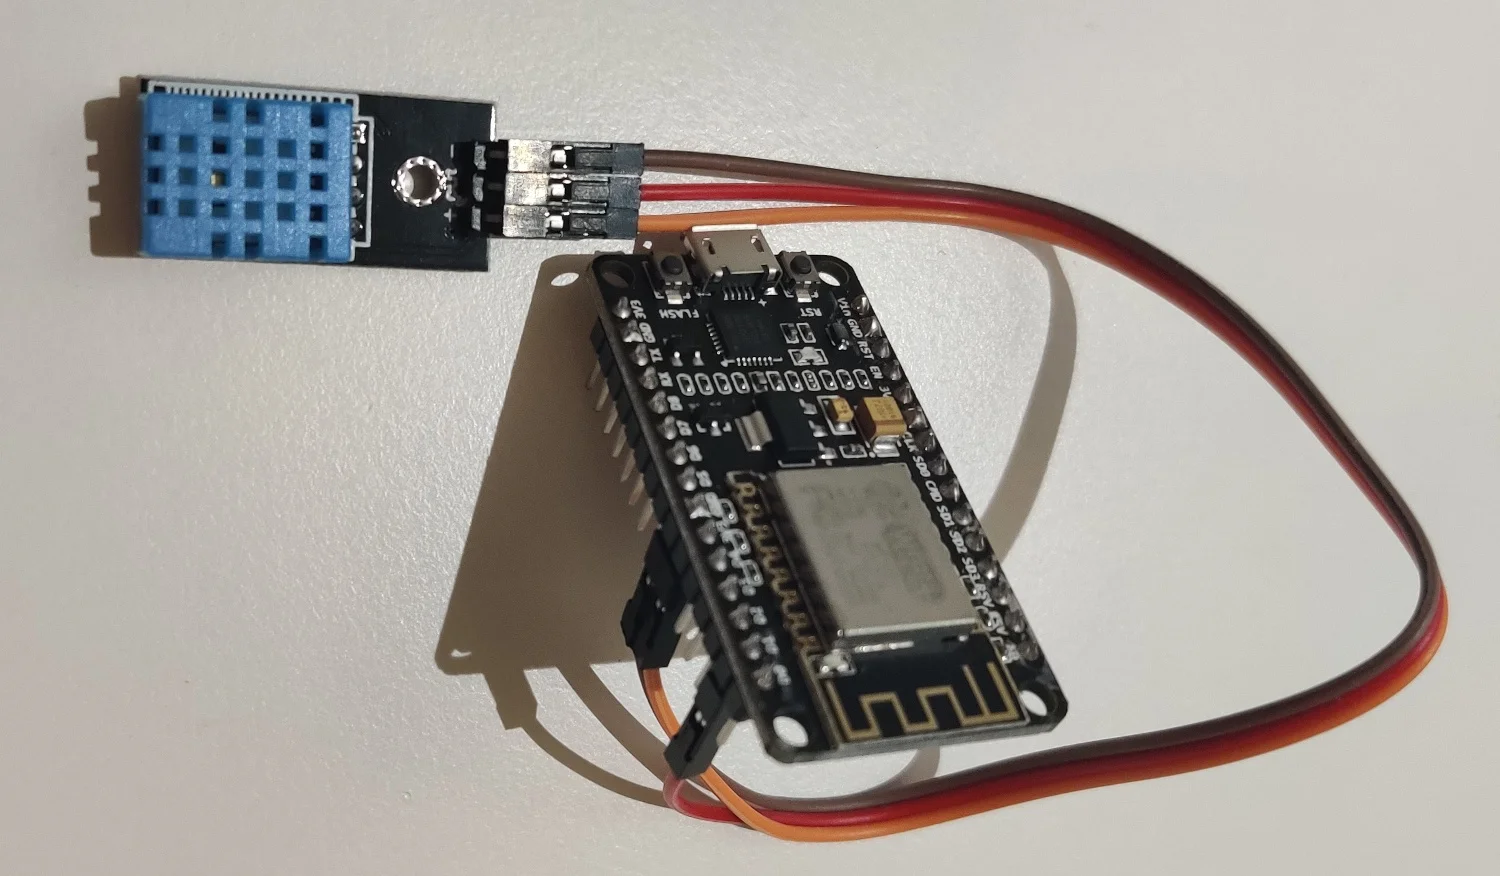 My NodeMCU with connected DHT11